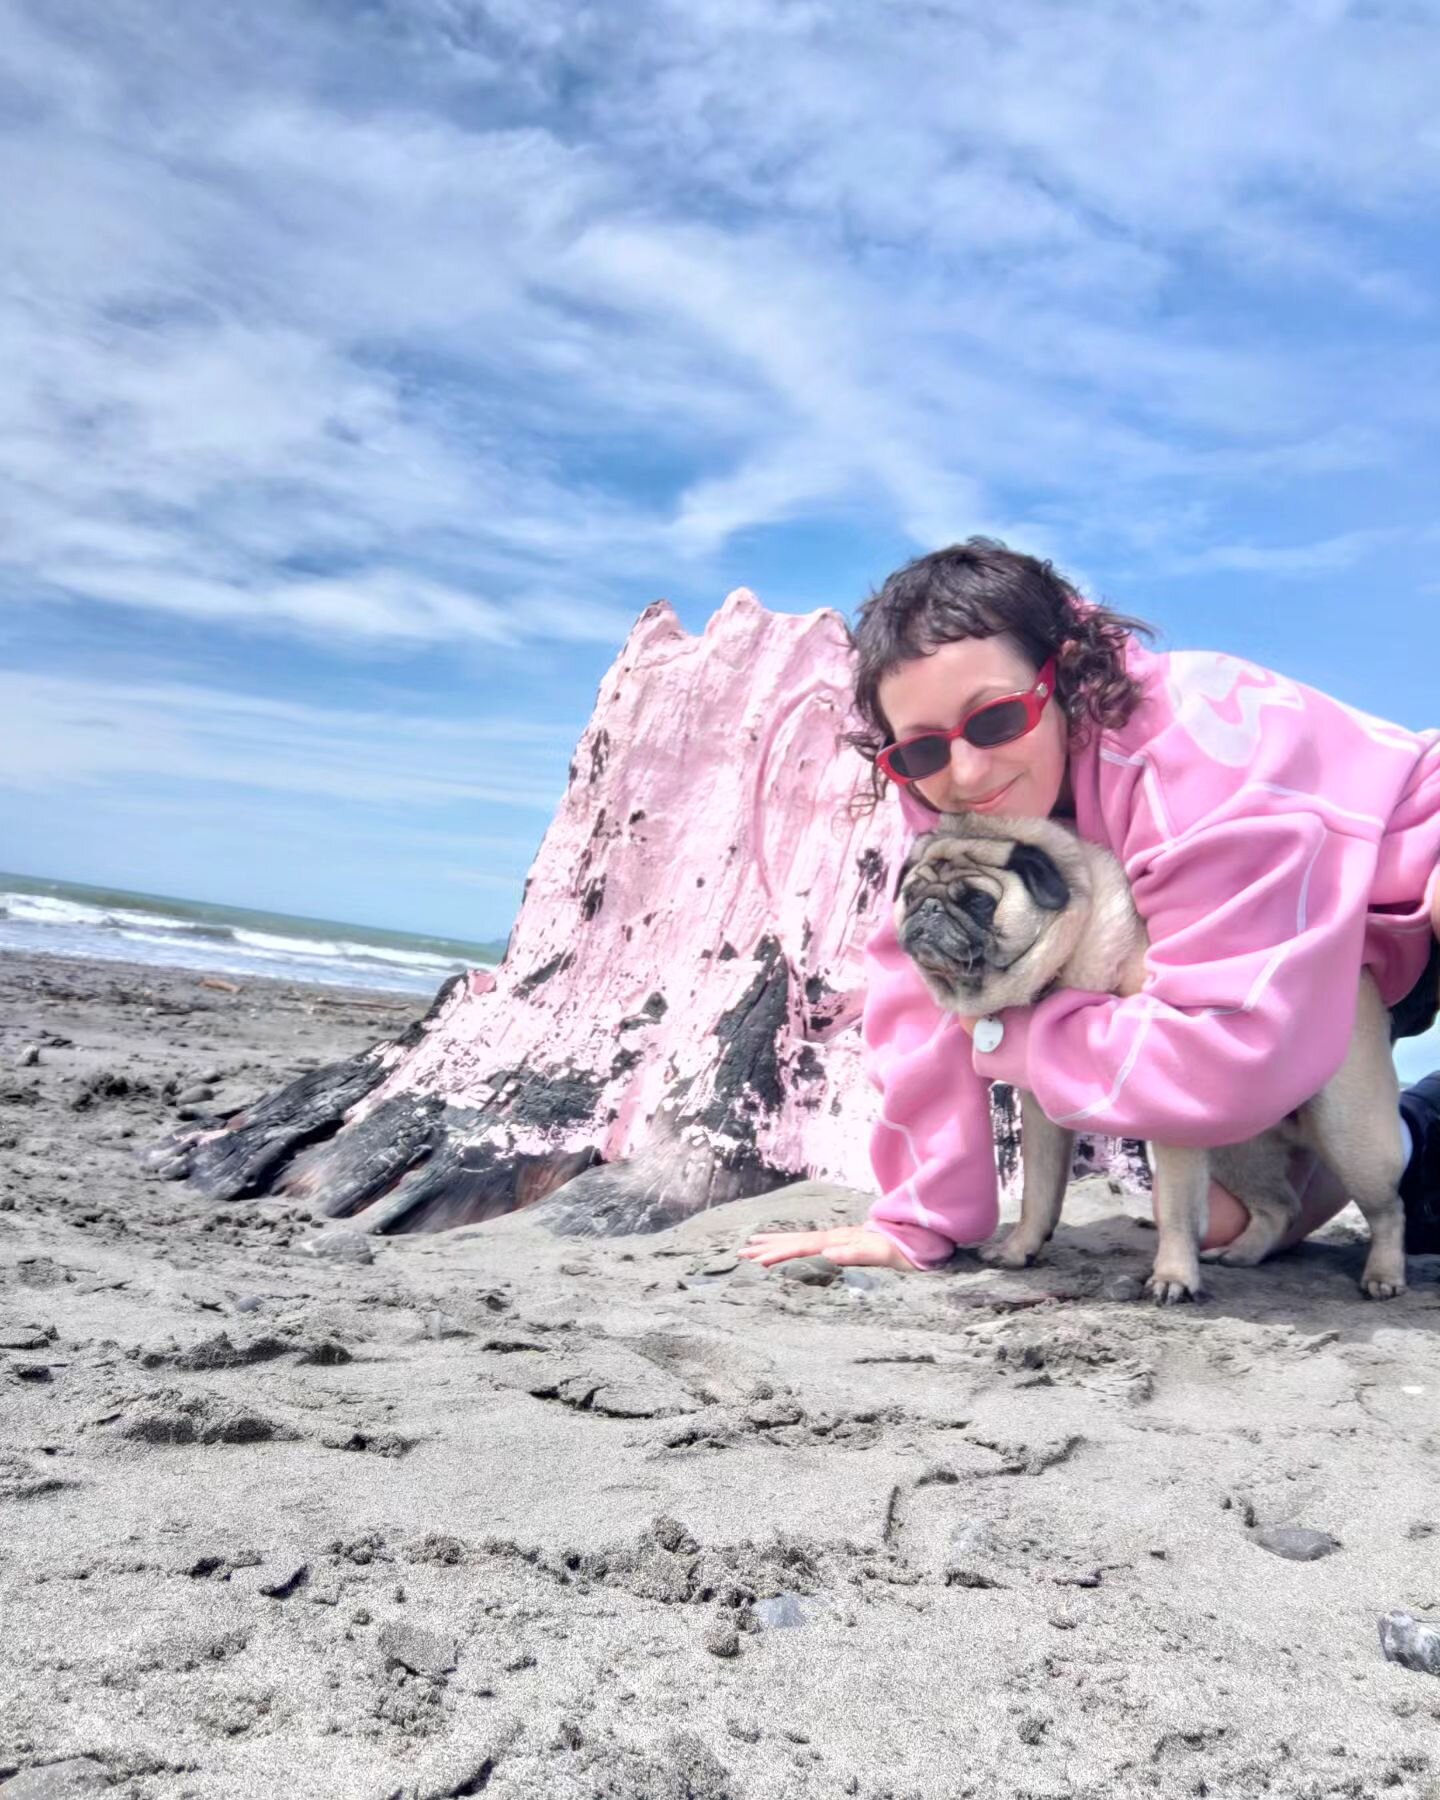 Taking a break after packing up my house and workshop. There's lots of work to be done before setting off but right now my job is beach and I'm in the company of the most adorable PUG. More to come!!